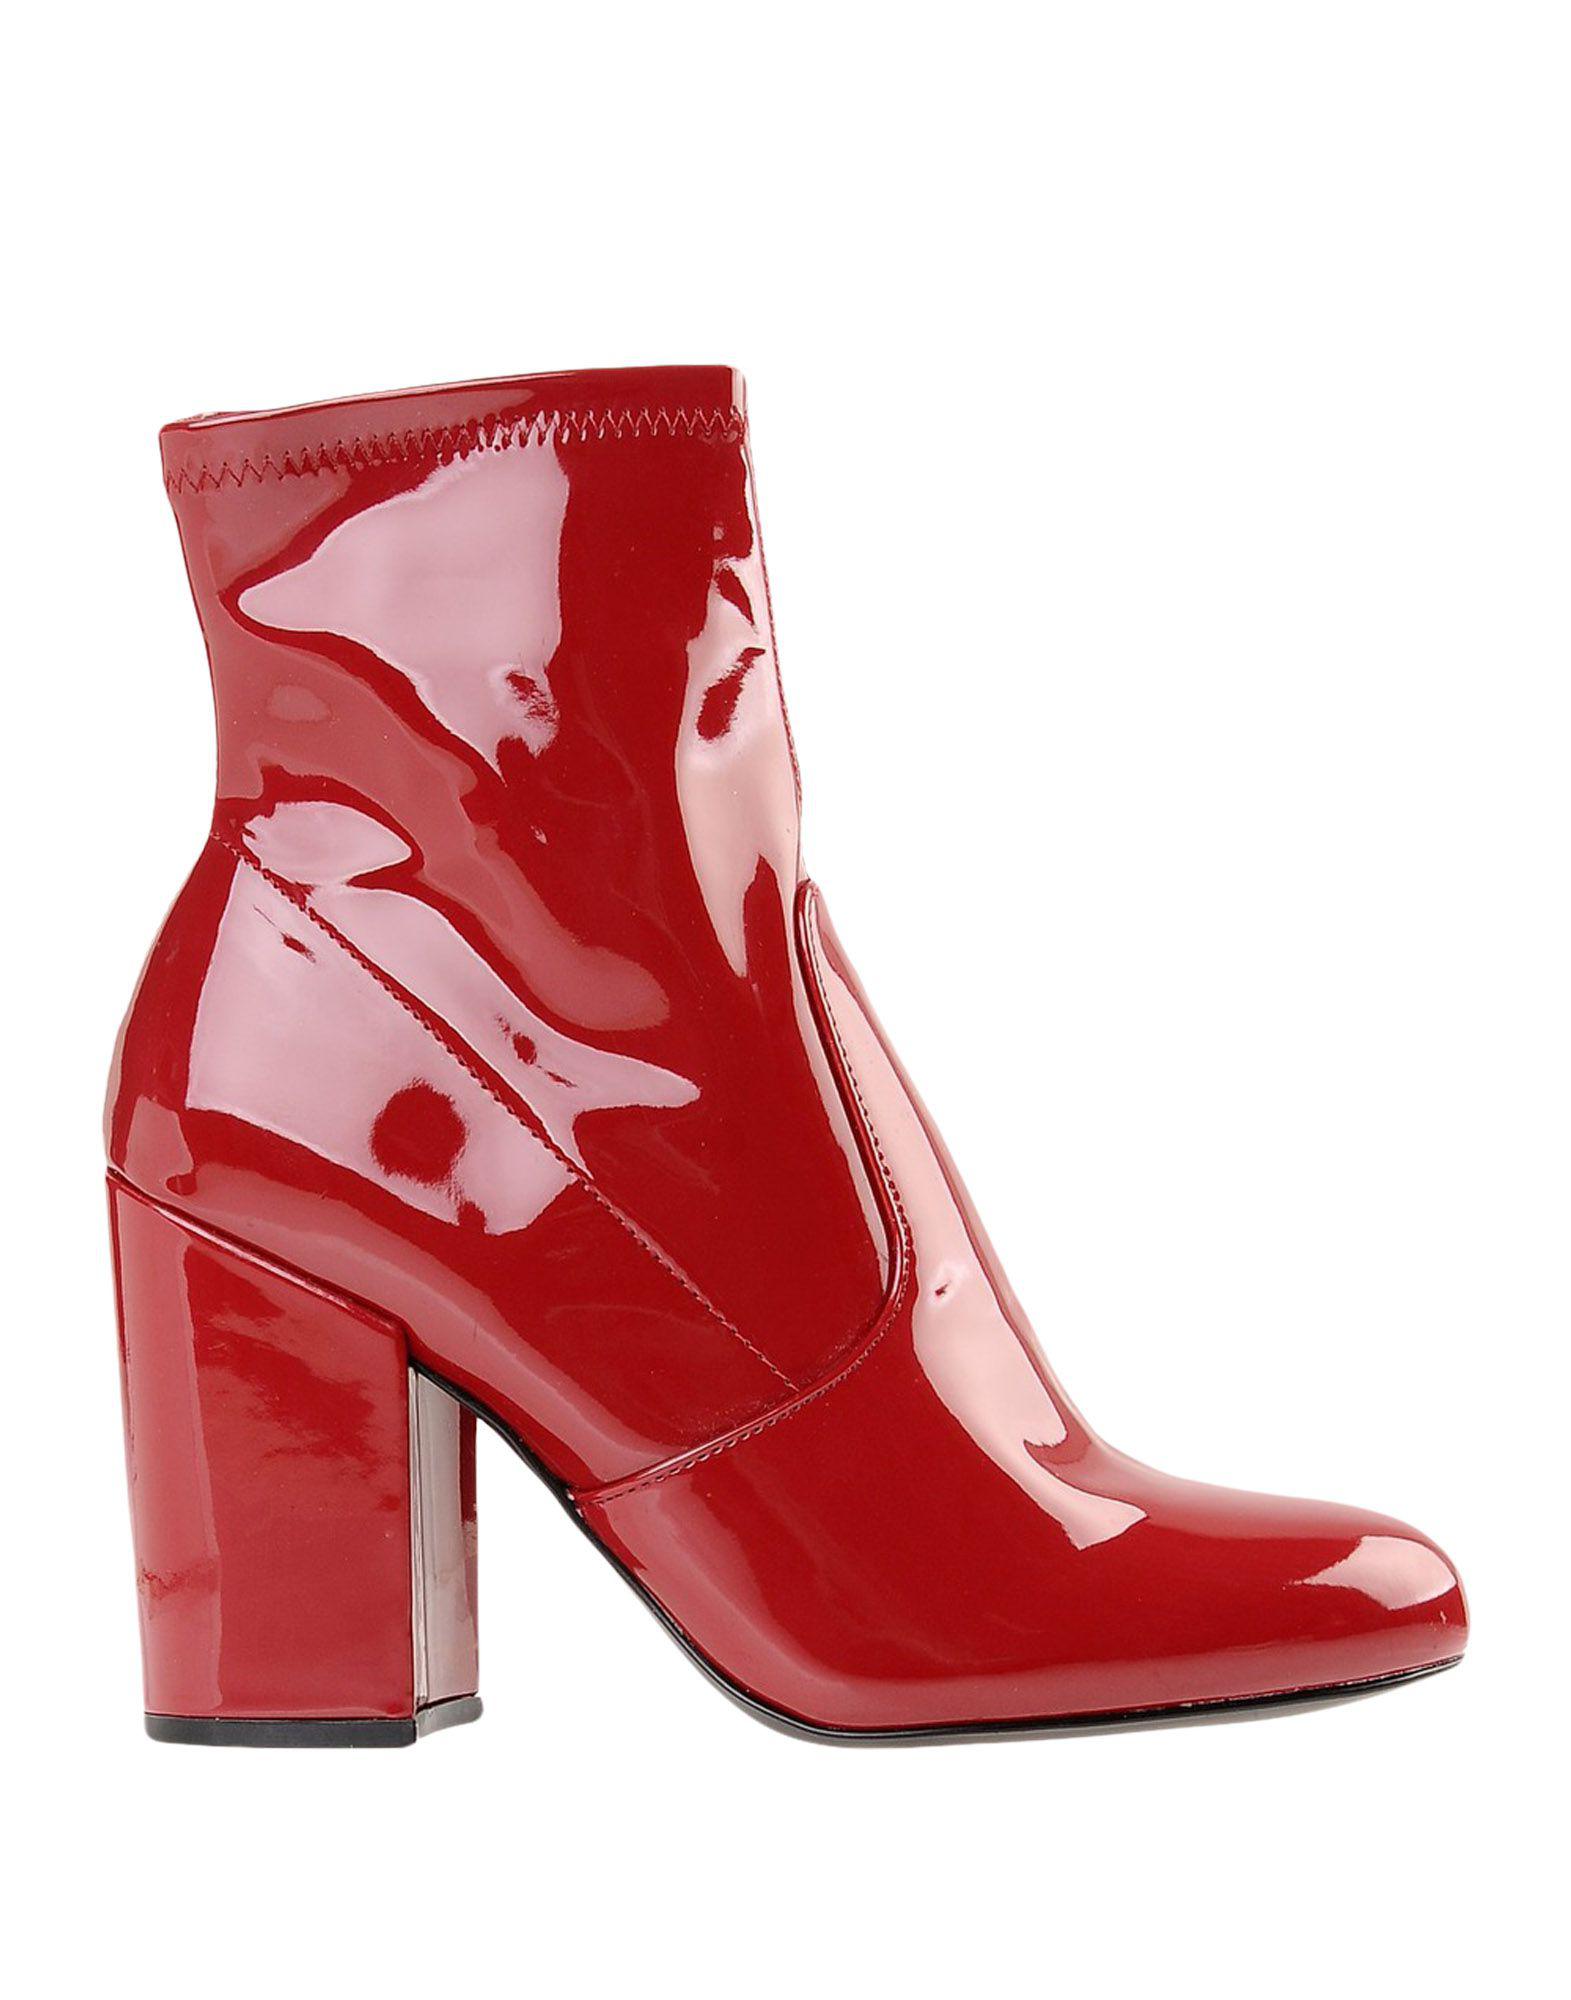 Steve Madden Ankle Boots in Red - Save 24% - Lyst